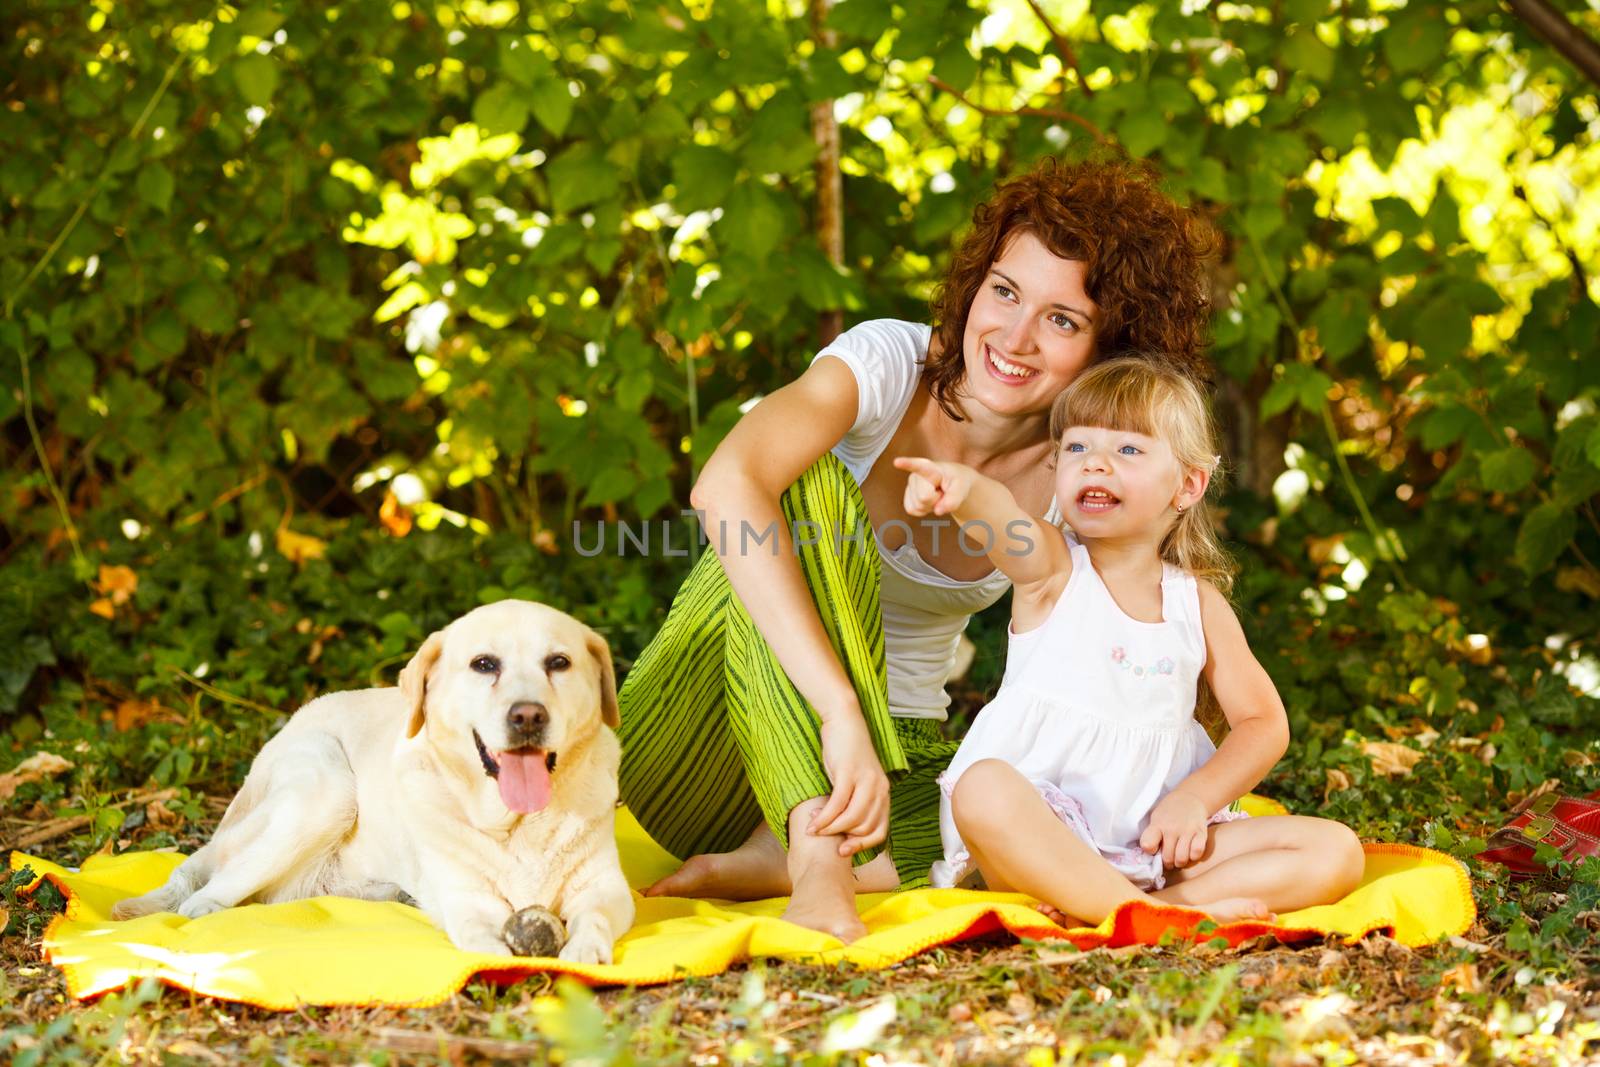 Beautiful mother and daughter relaxing in nature with their dog